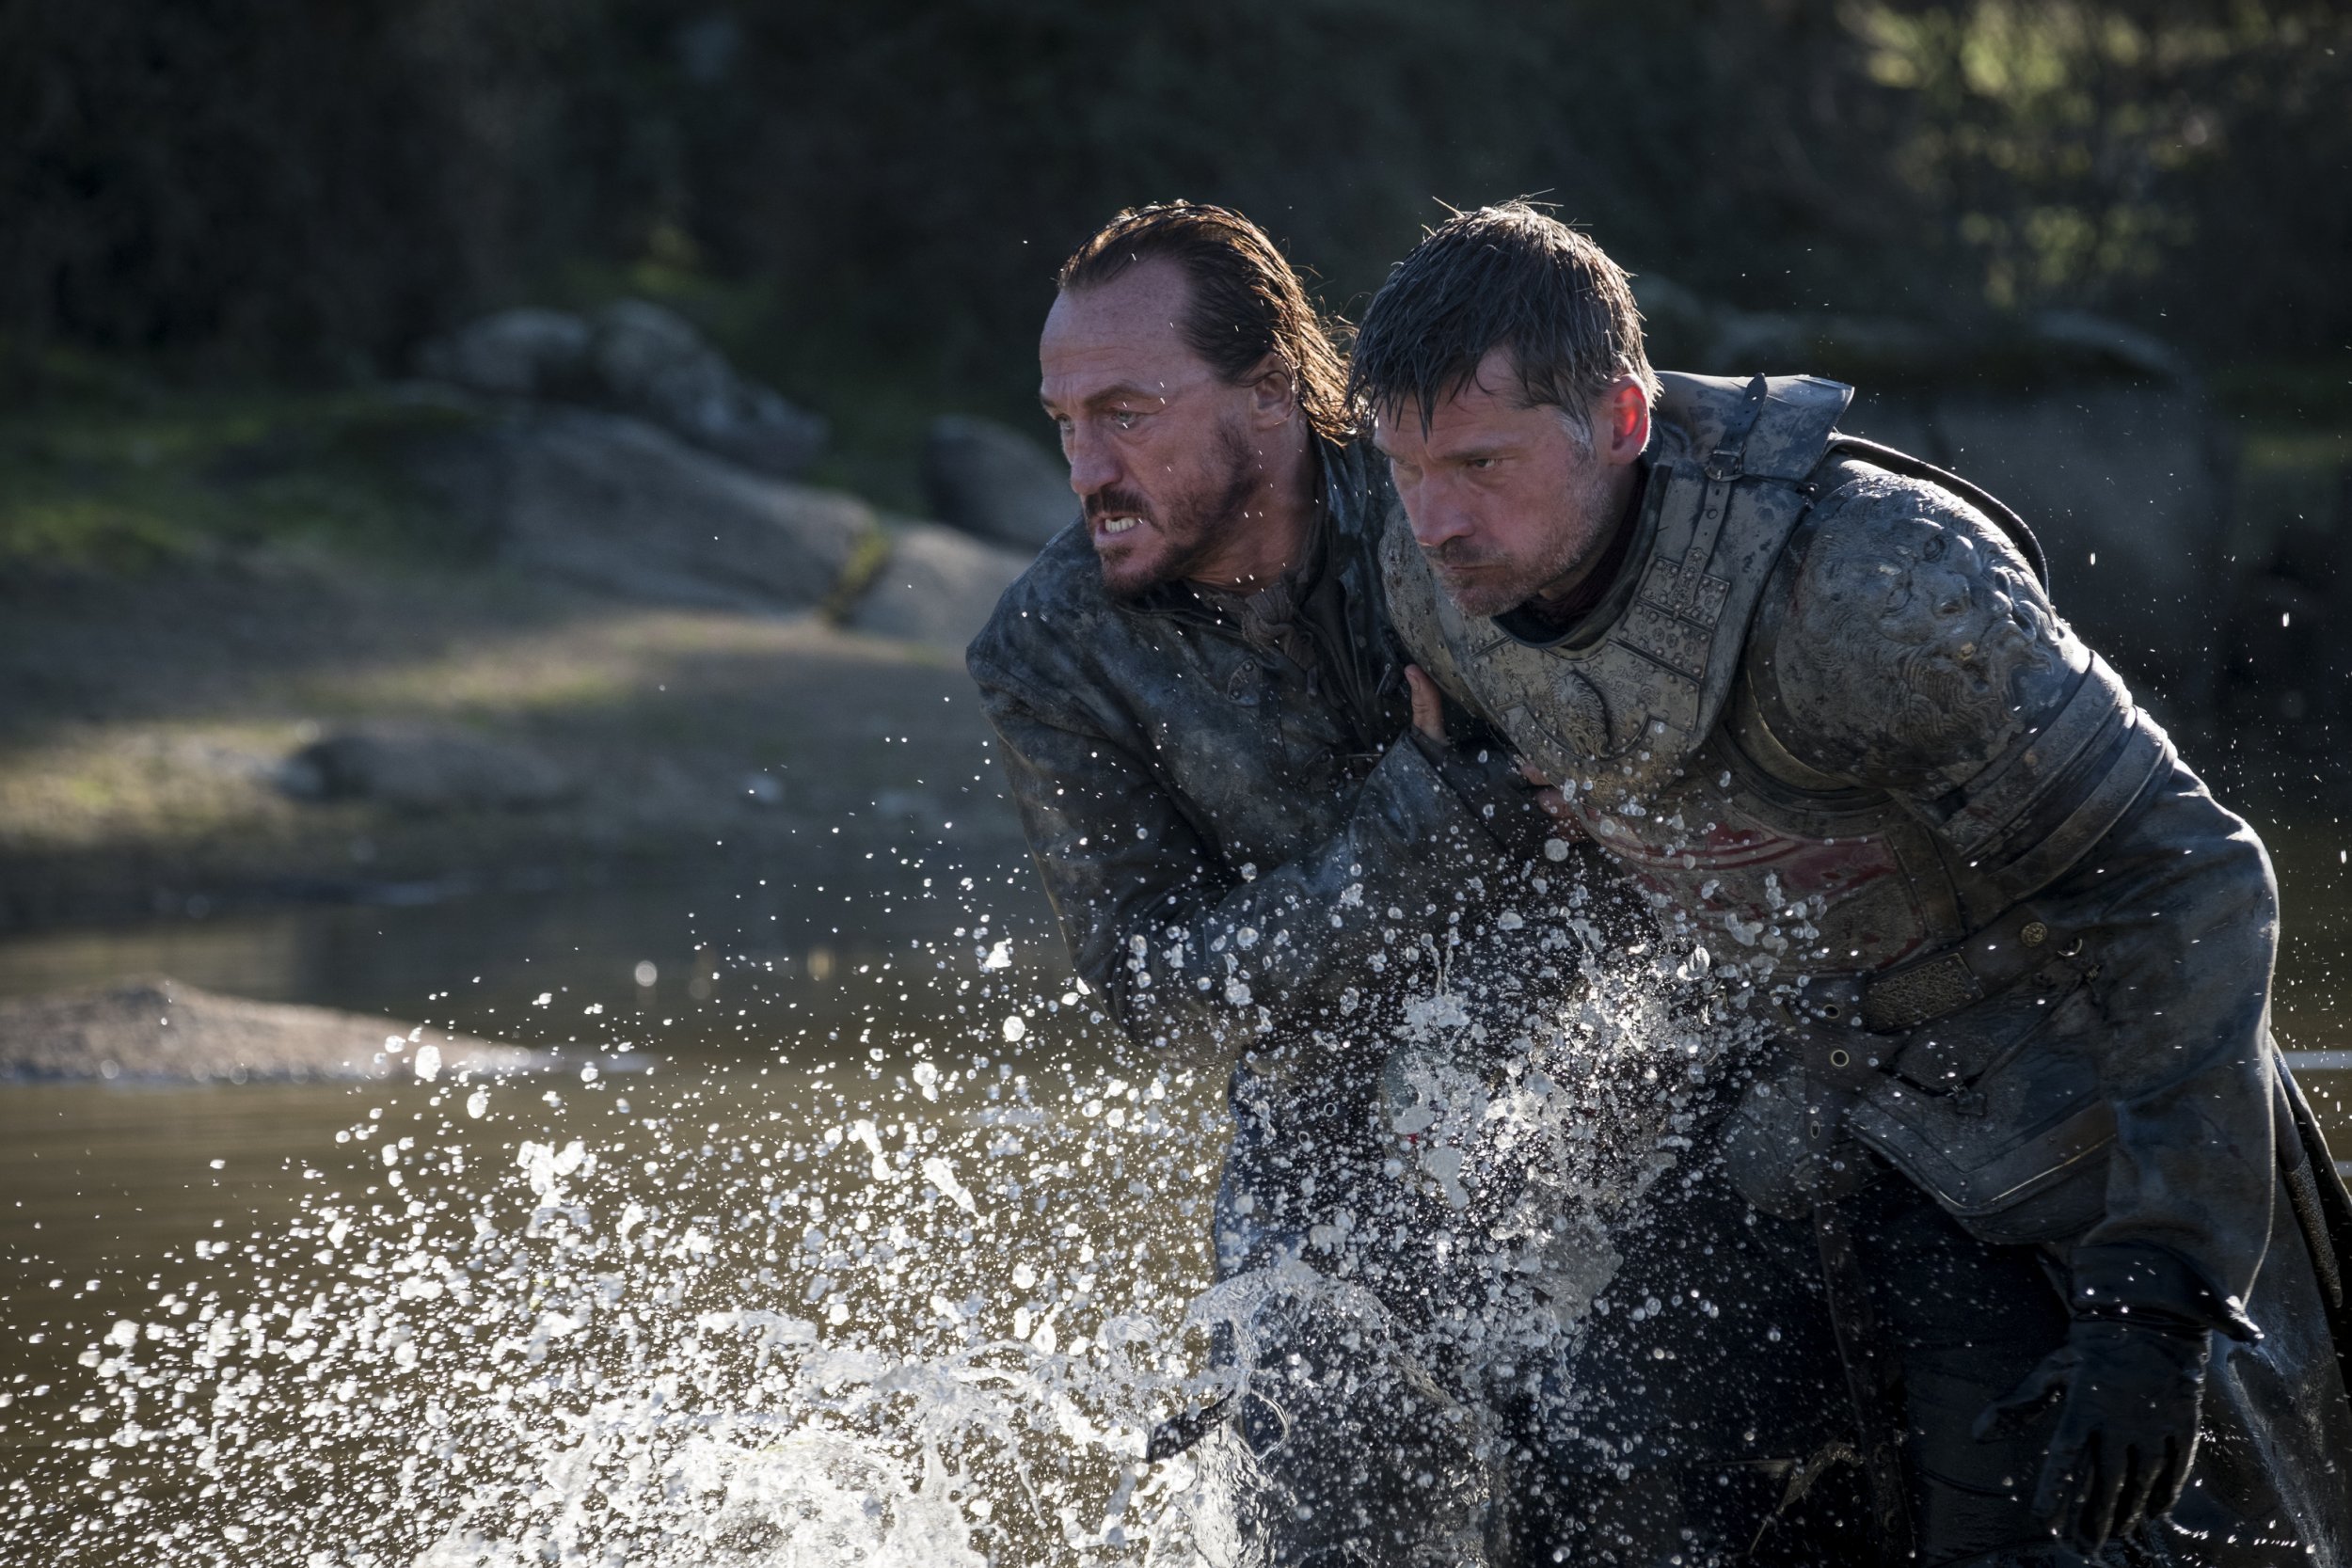 Game of Thrones' Bronn and Jaime Lannister